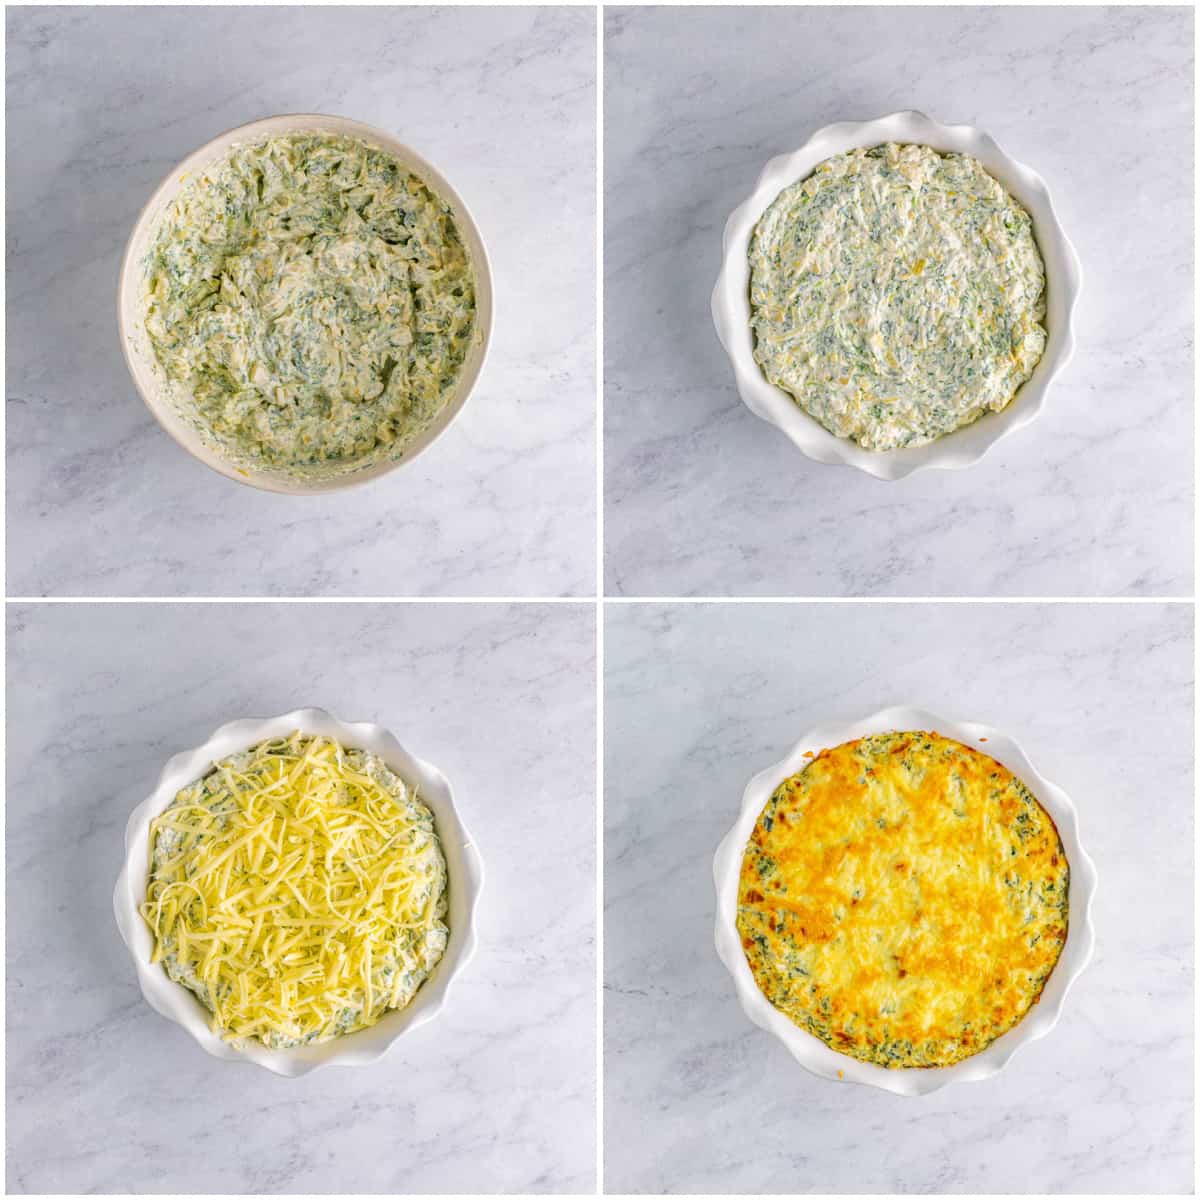 Step by step photos on how to make Hot Spinach Artichoke Dip.